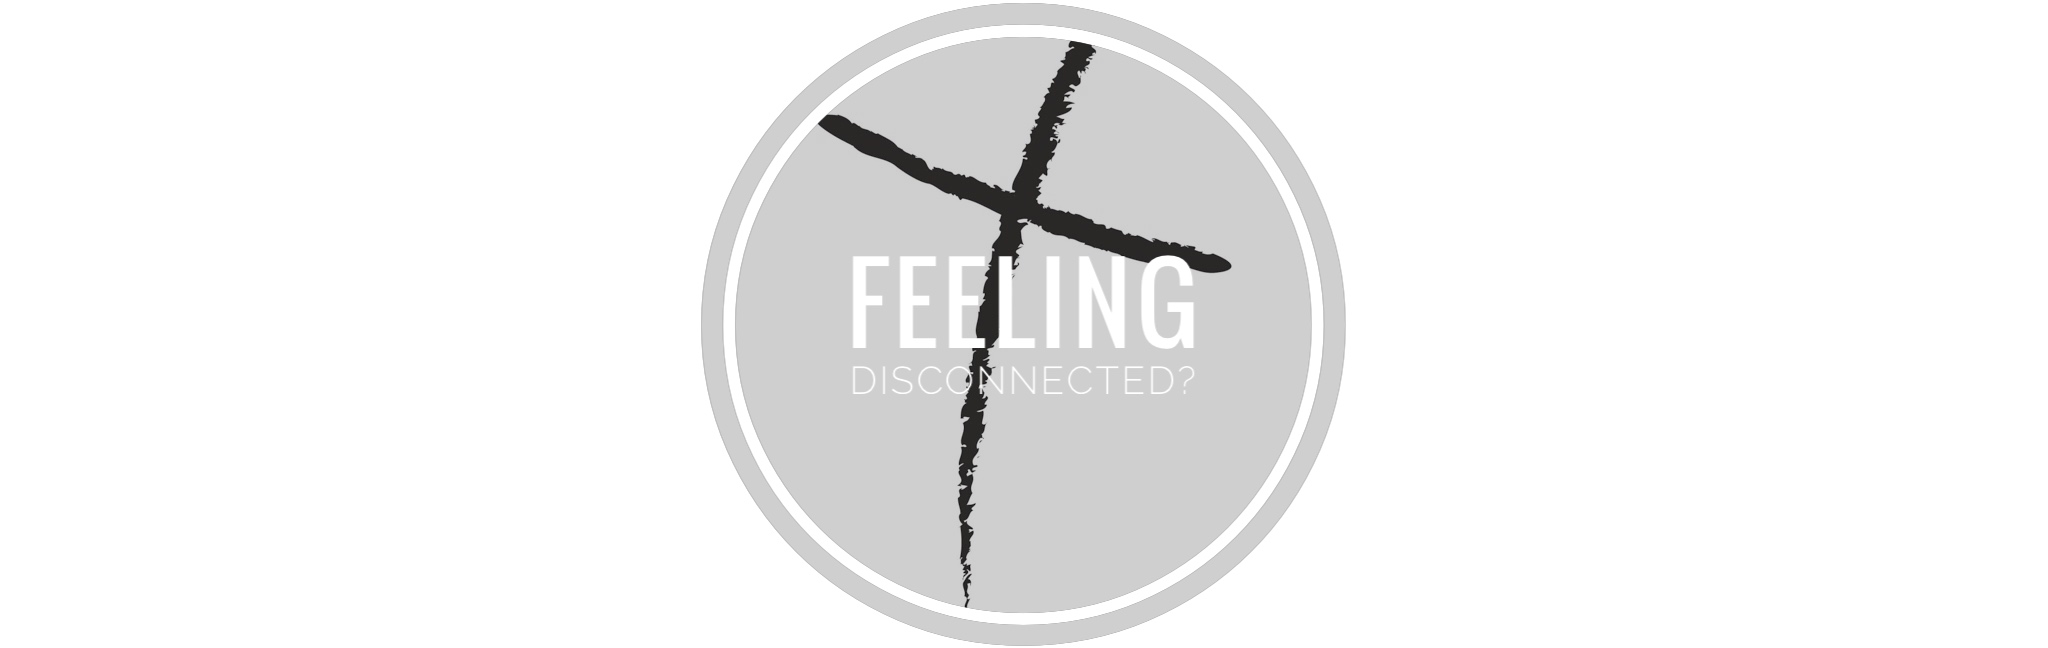 Feeling Disconnected?